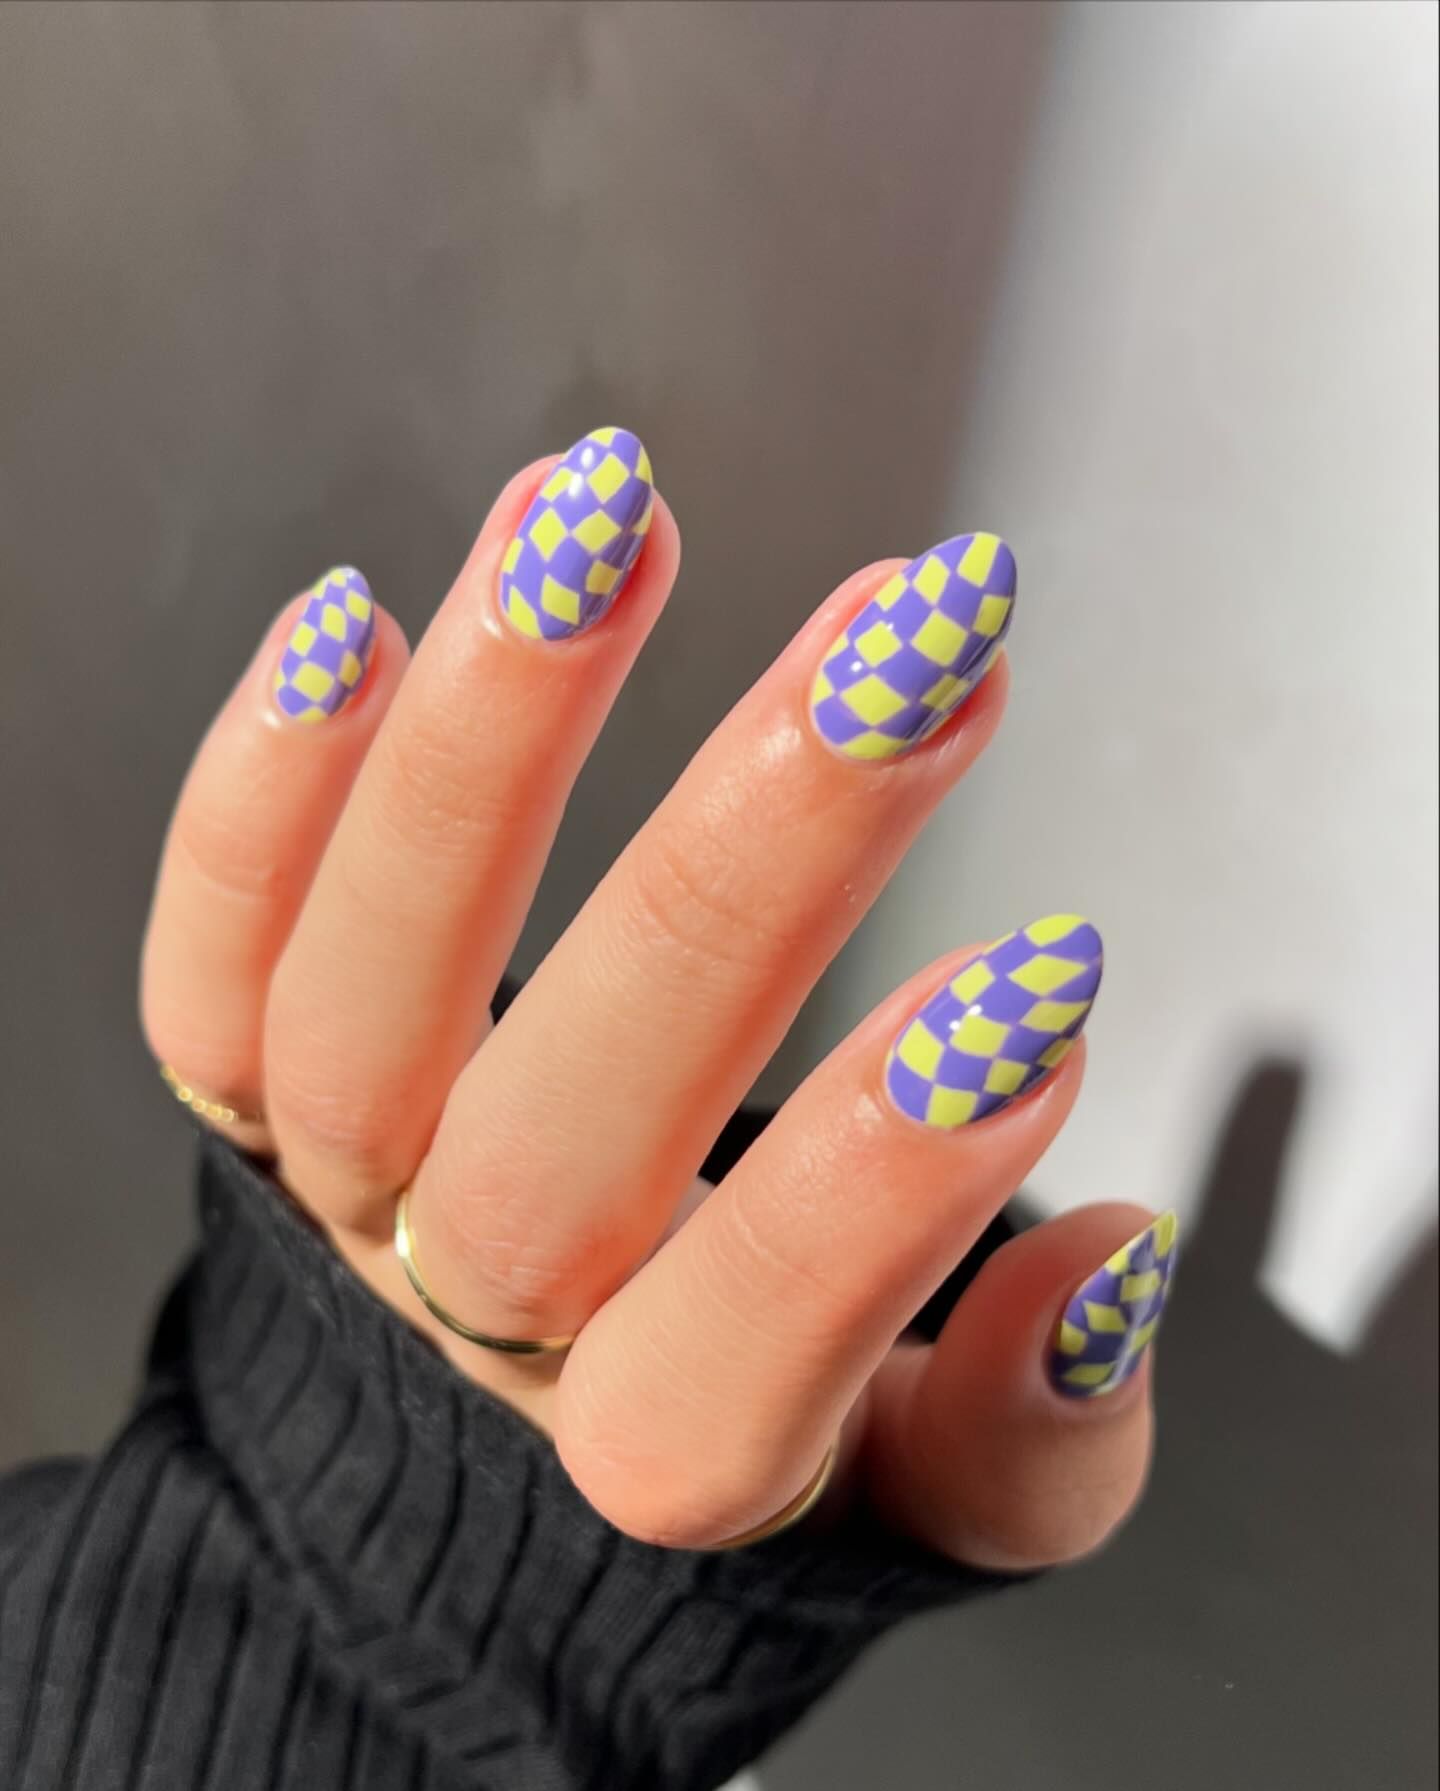 100+ Short Nail Designs You’ll Want To Try This Year images 94